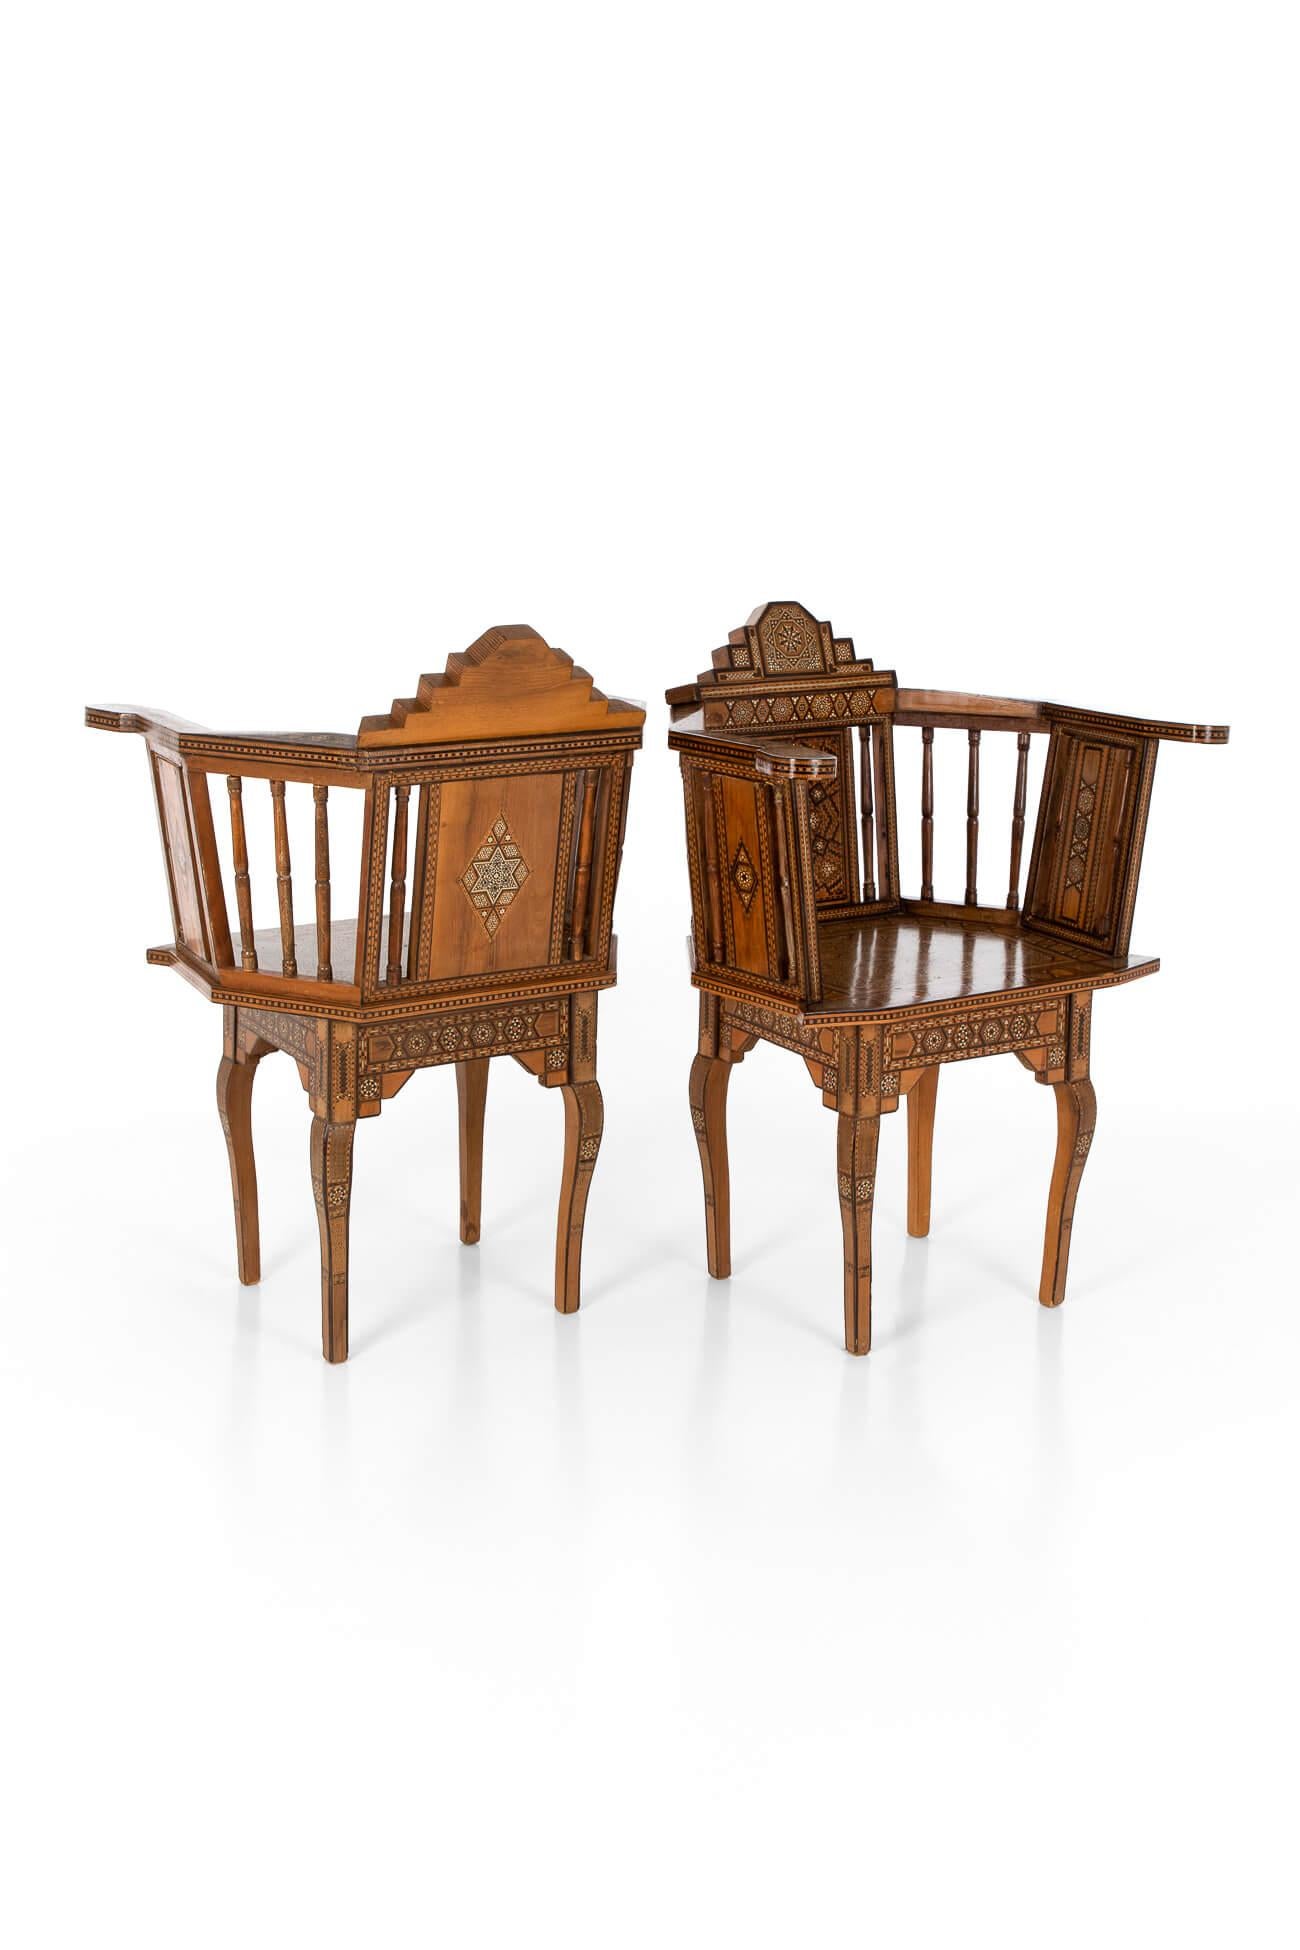 An outstanding pair of Arabian Damascus chairs made from local specimen timber and bone.

Each chair demonstrates intricate parquetry in the traditional Islamic taste bearing geometric motifs and shapes.

Exquisitely crafted and in superb condition.